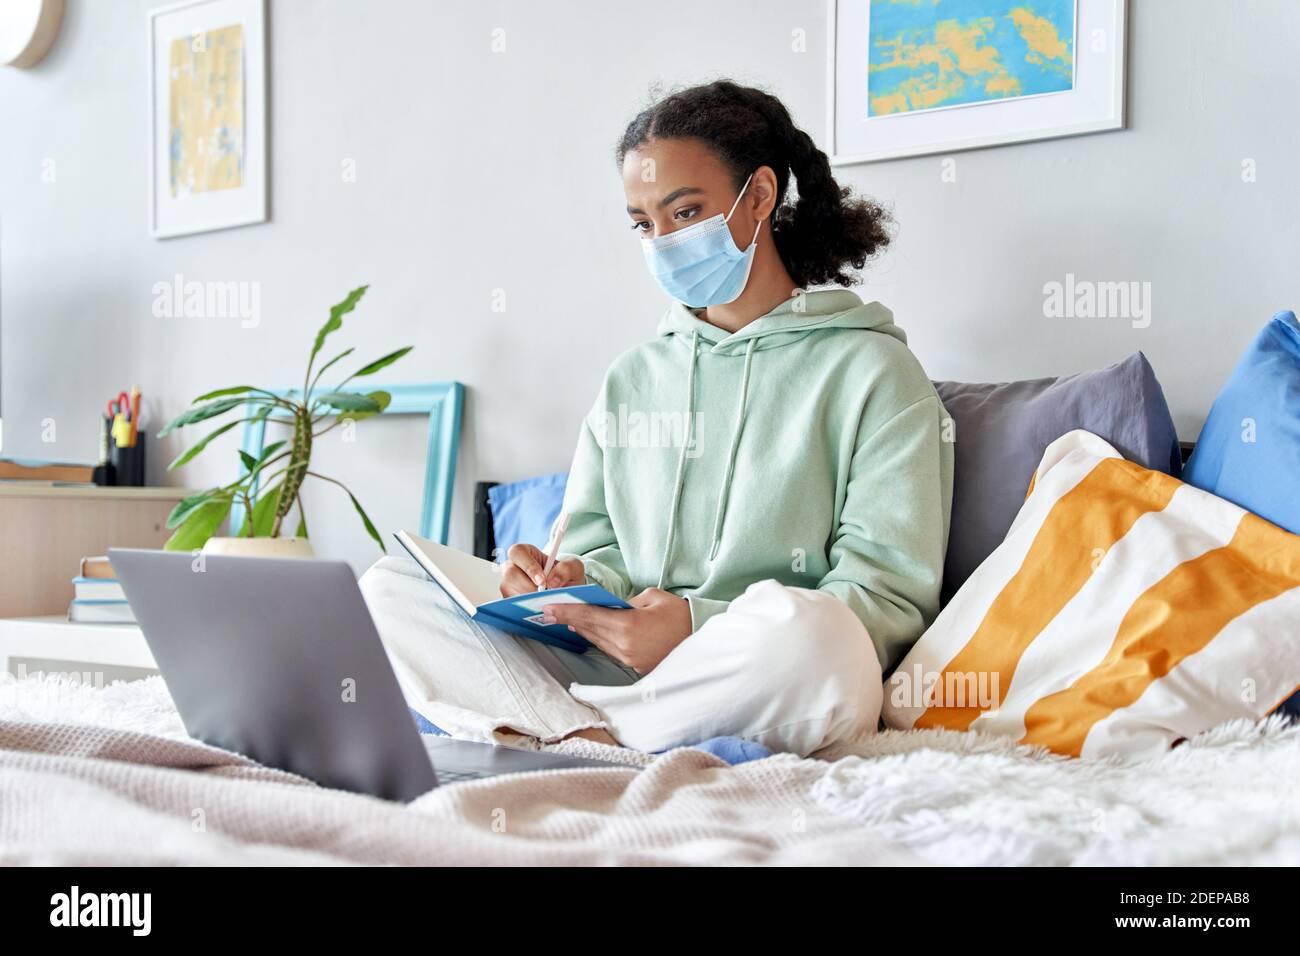 Mixed race teenage girl wearing face mask remote studying online at home. Stock Photo